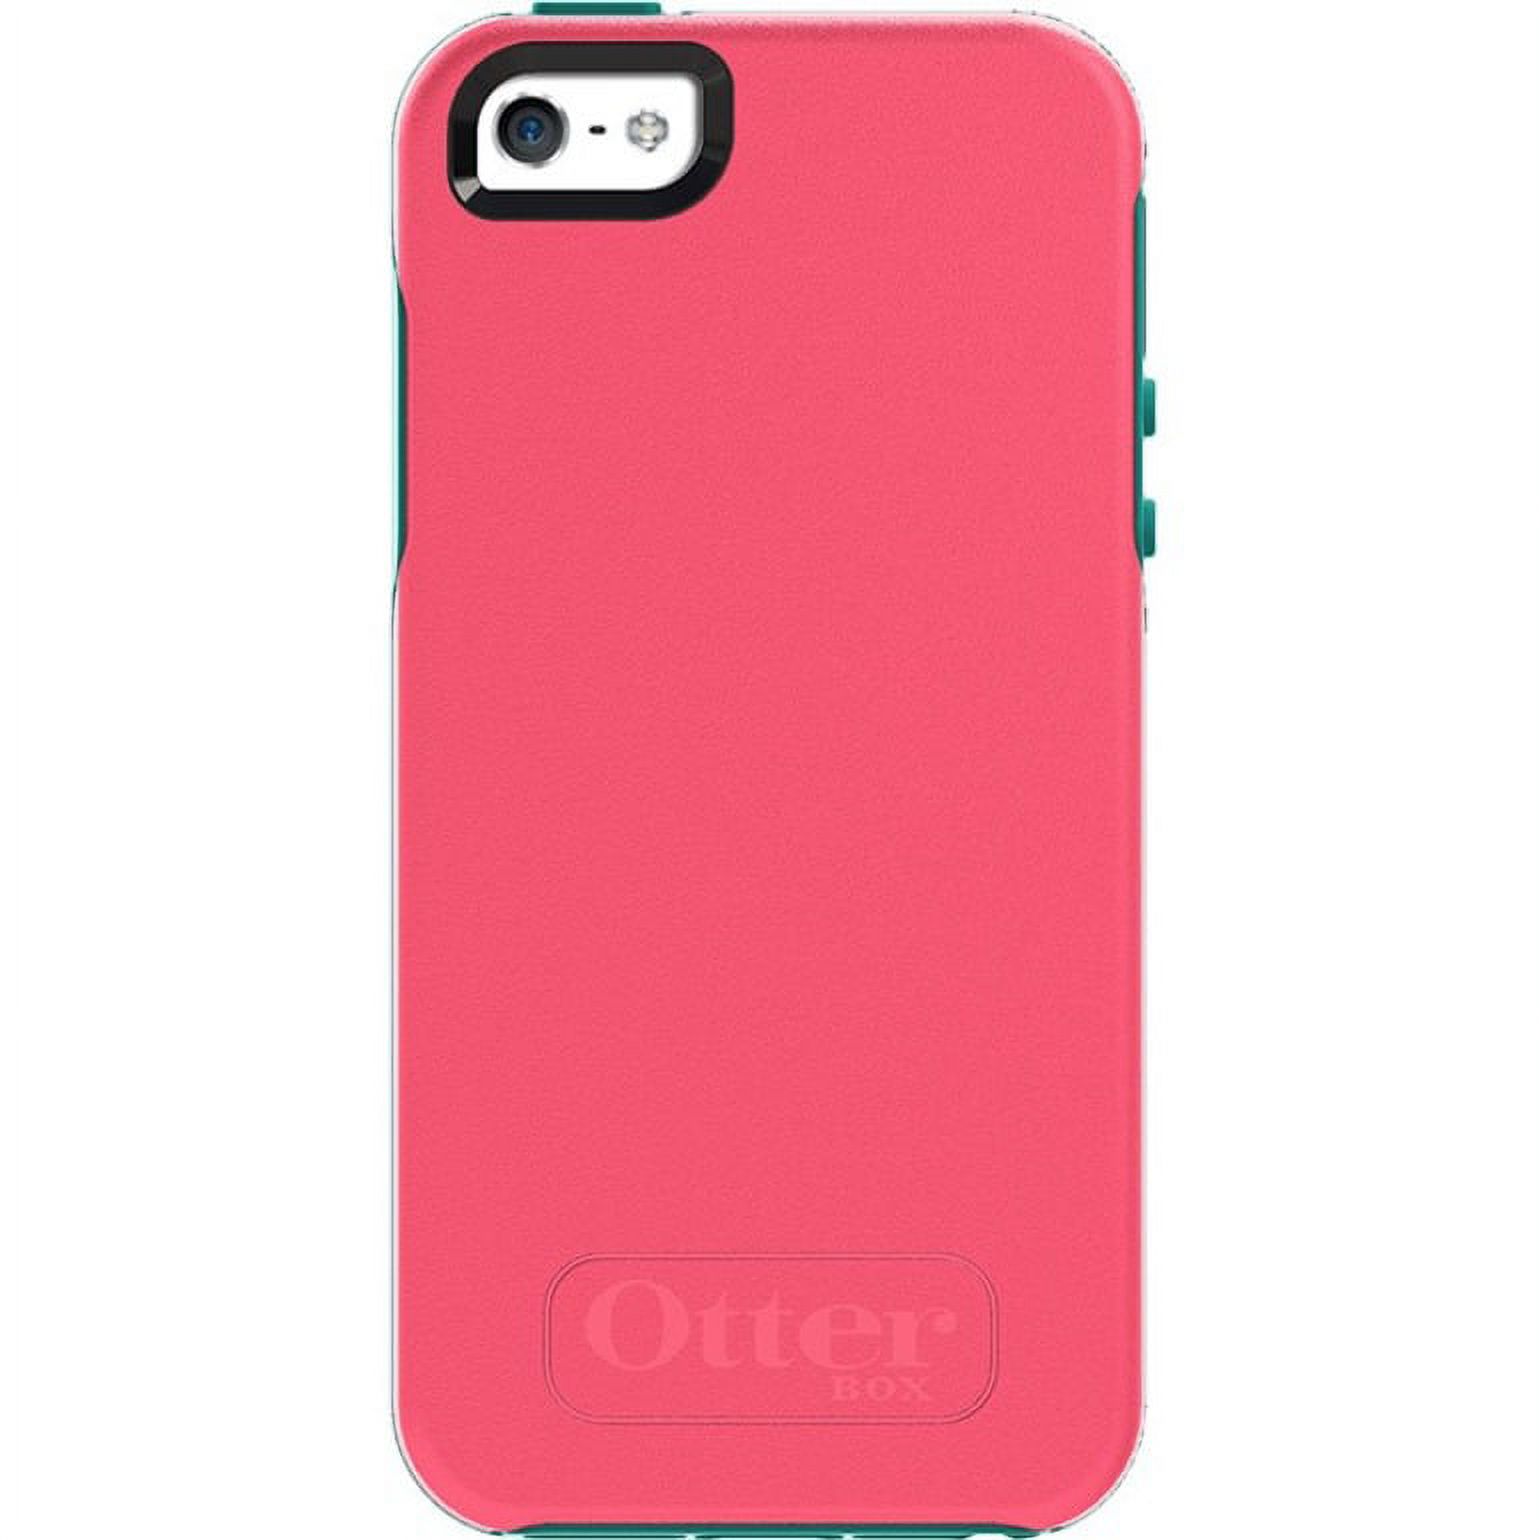 OtterBox Symmetry Series for Apple iPhone 5/5s - image 3 of 4